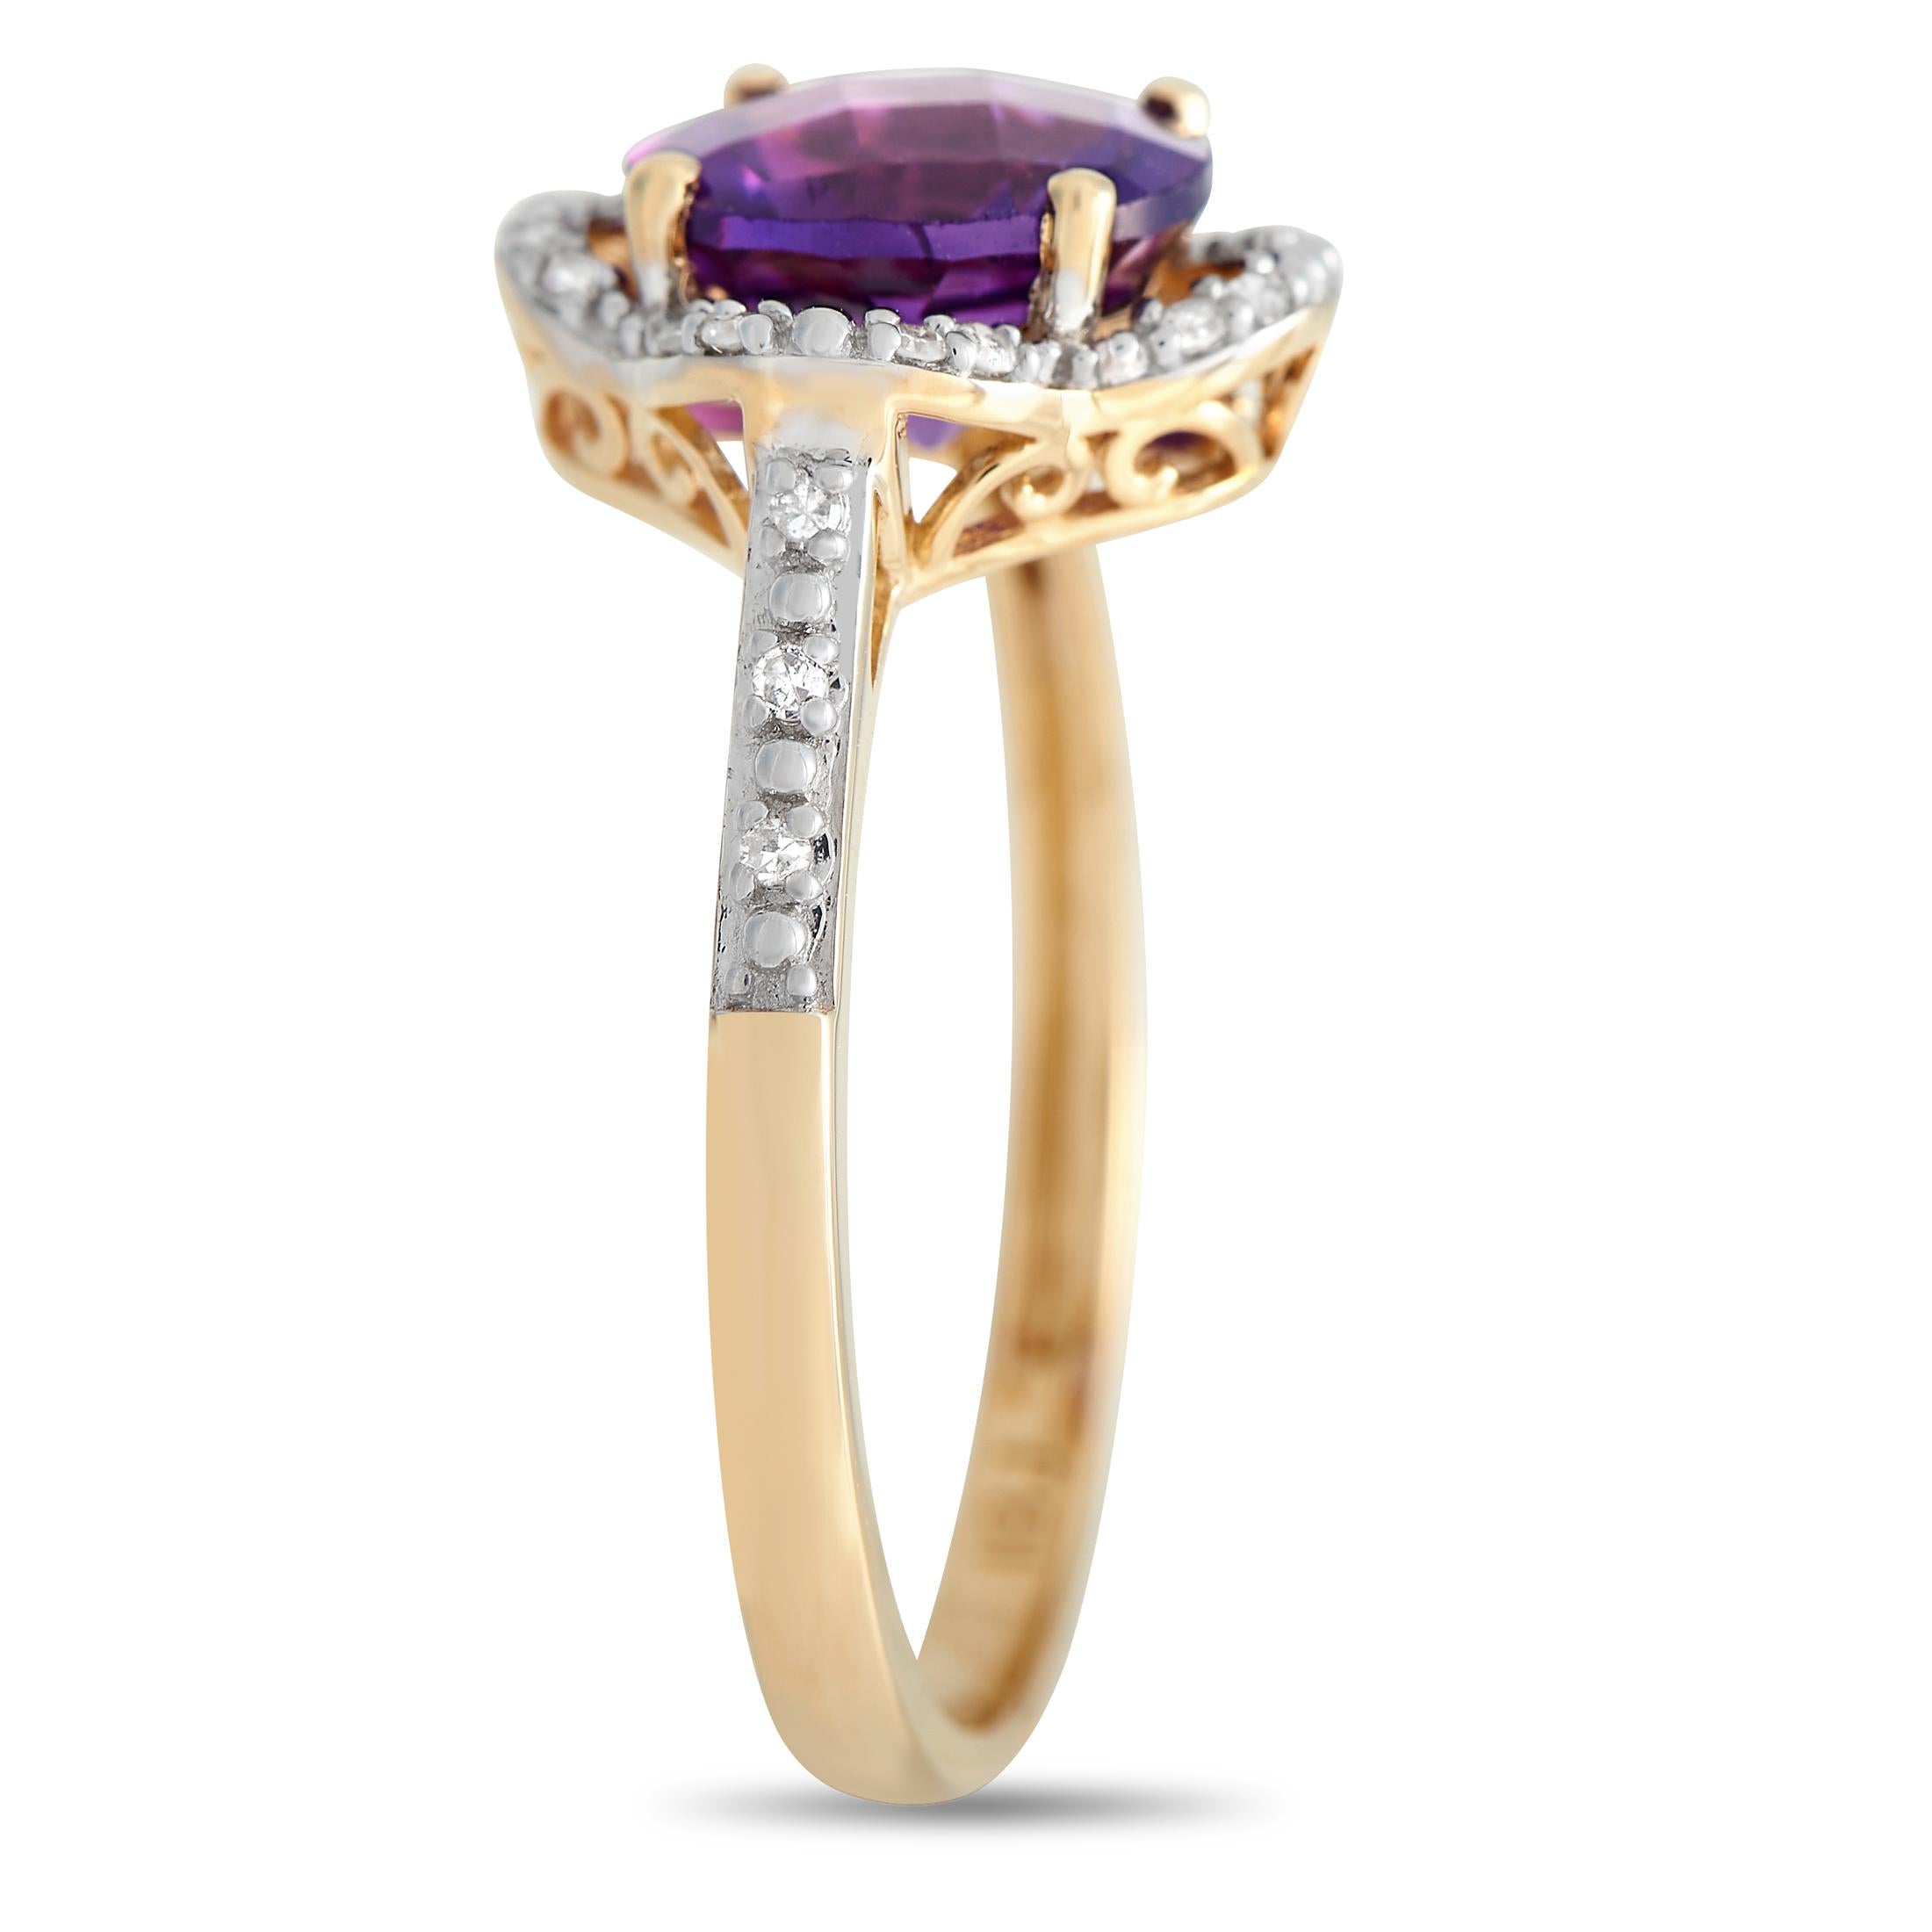 A stunning gift choice for a loved one born in February. This beautiful ring in 14K yellow gold is topped with a round amethyst, the February birthstone. The faceted purple gem is held by four prongs and surrounded by a quatrefoil-shaped frame